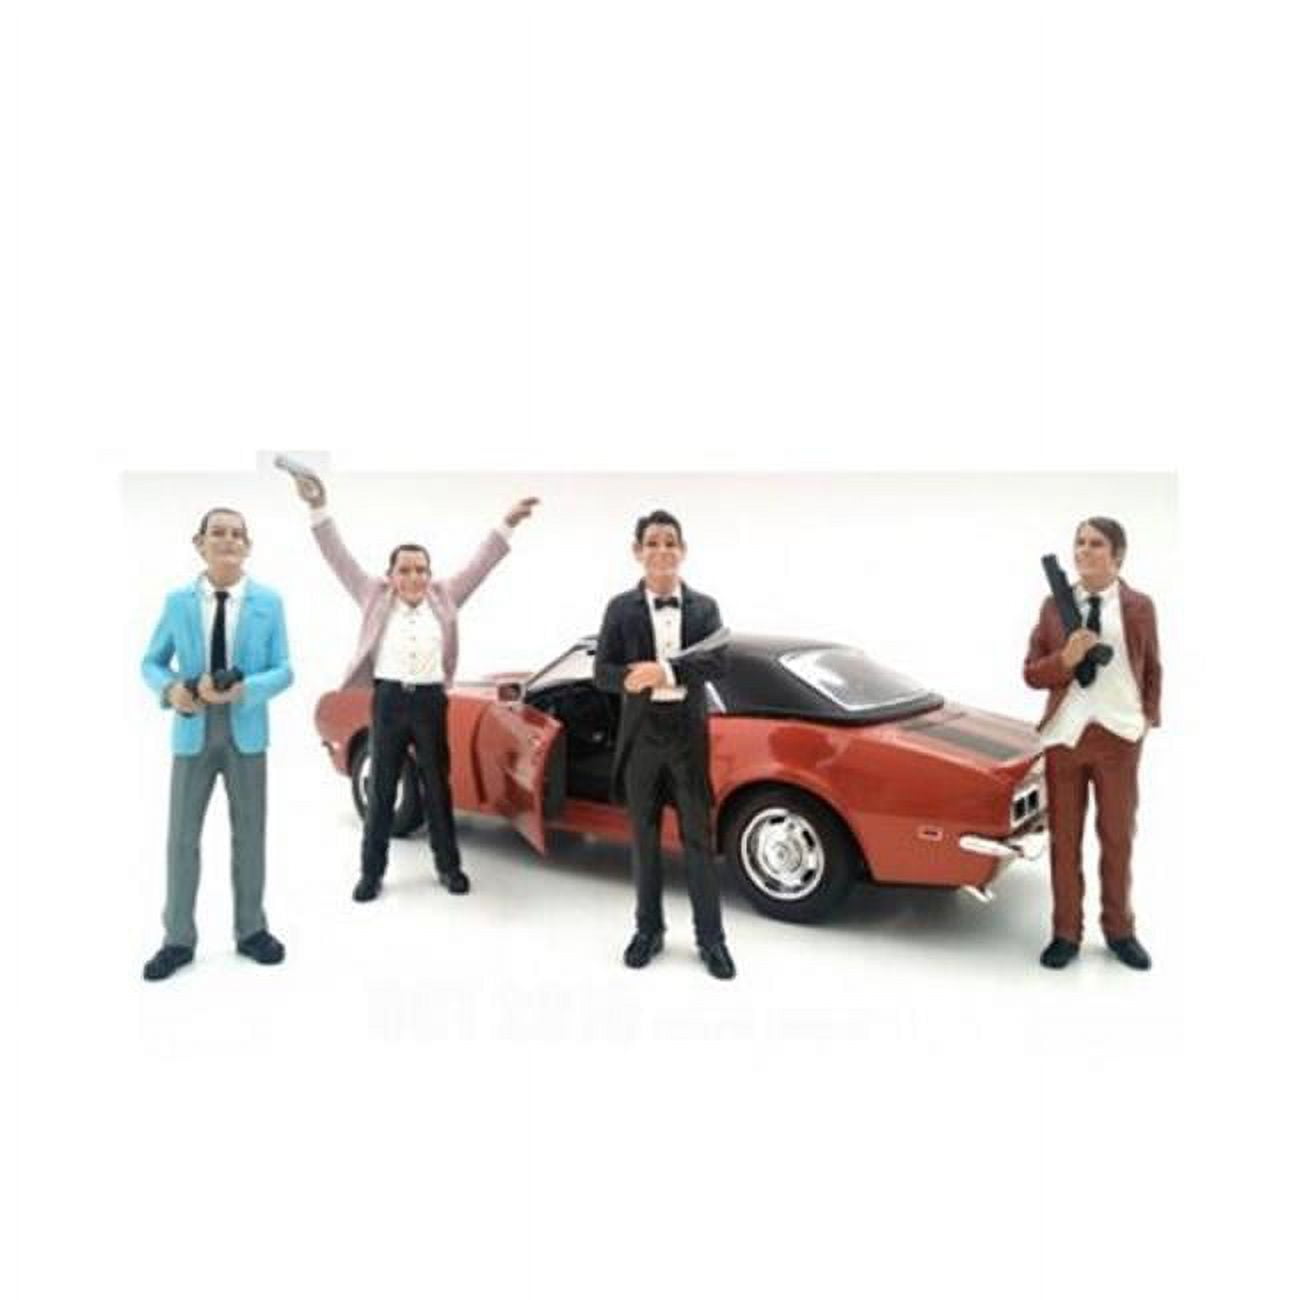 23883-23884-23885-23886 The Robbers Figure Set For 1-18 Scale Model, 4 Piece